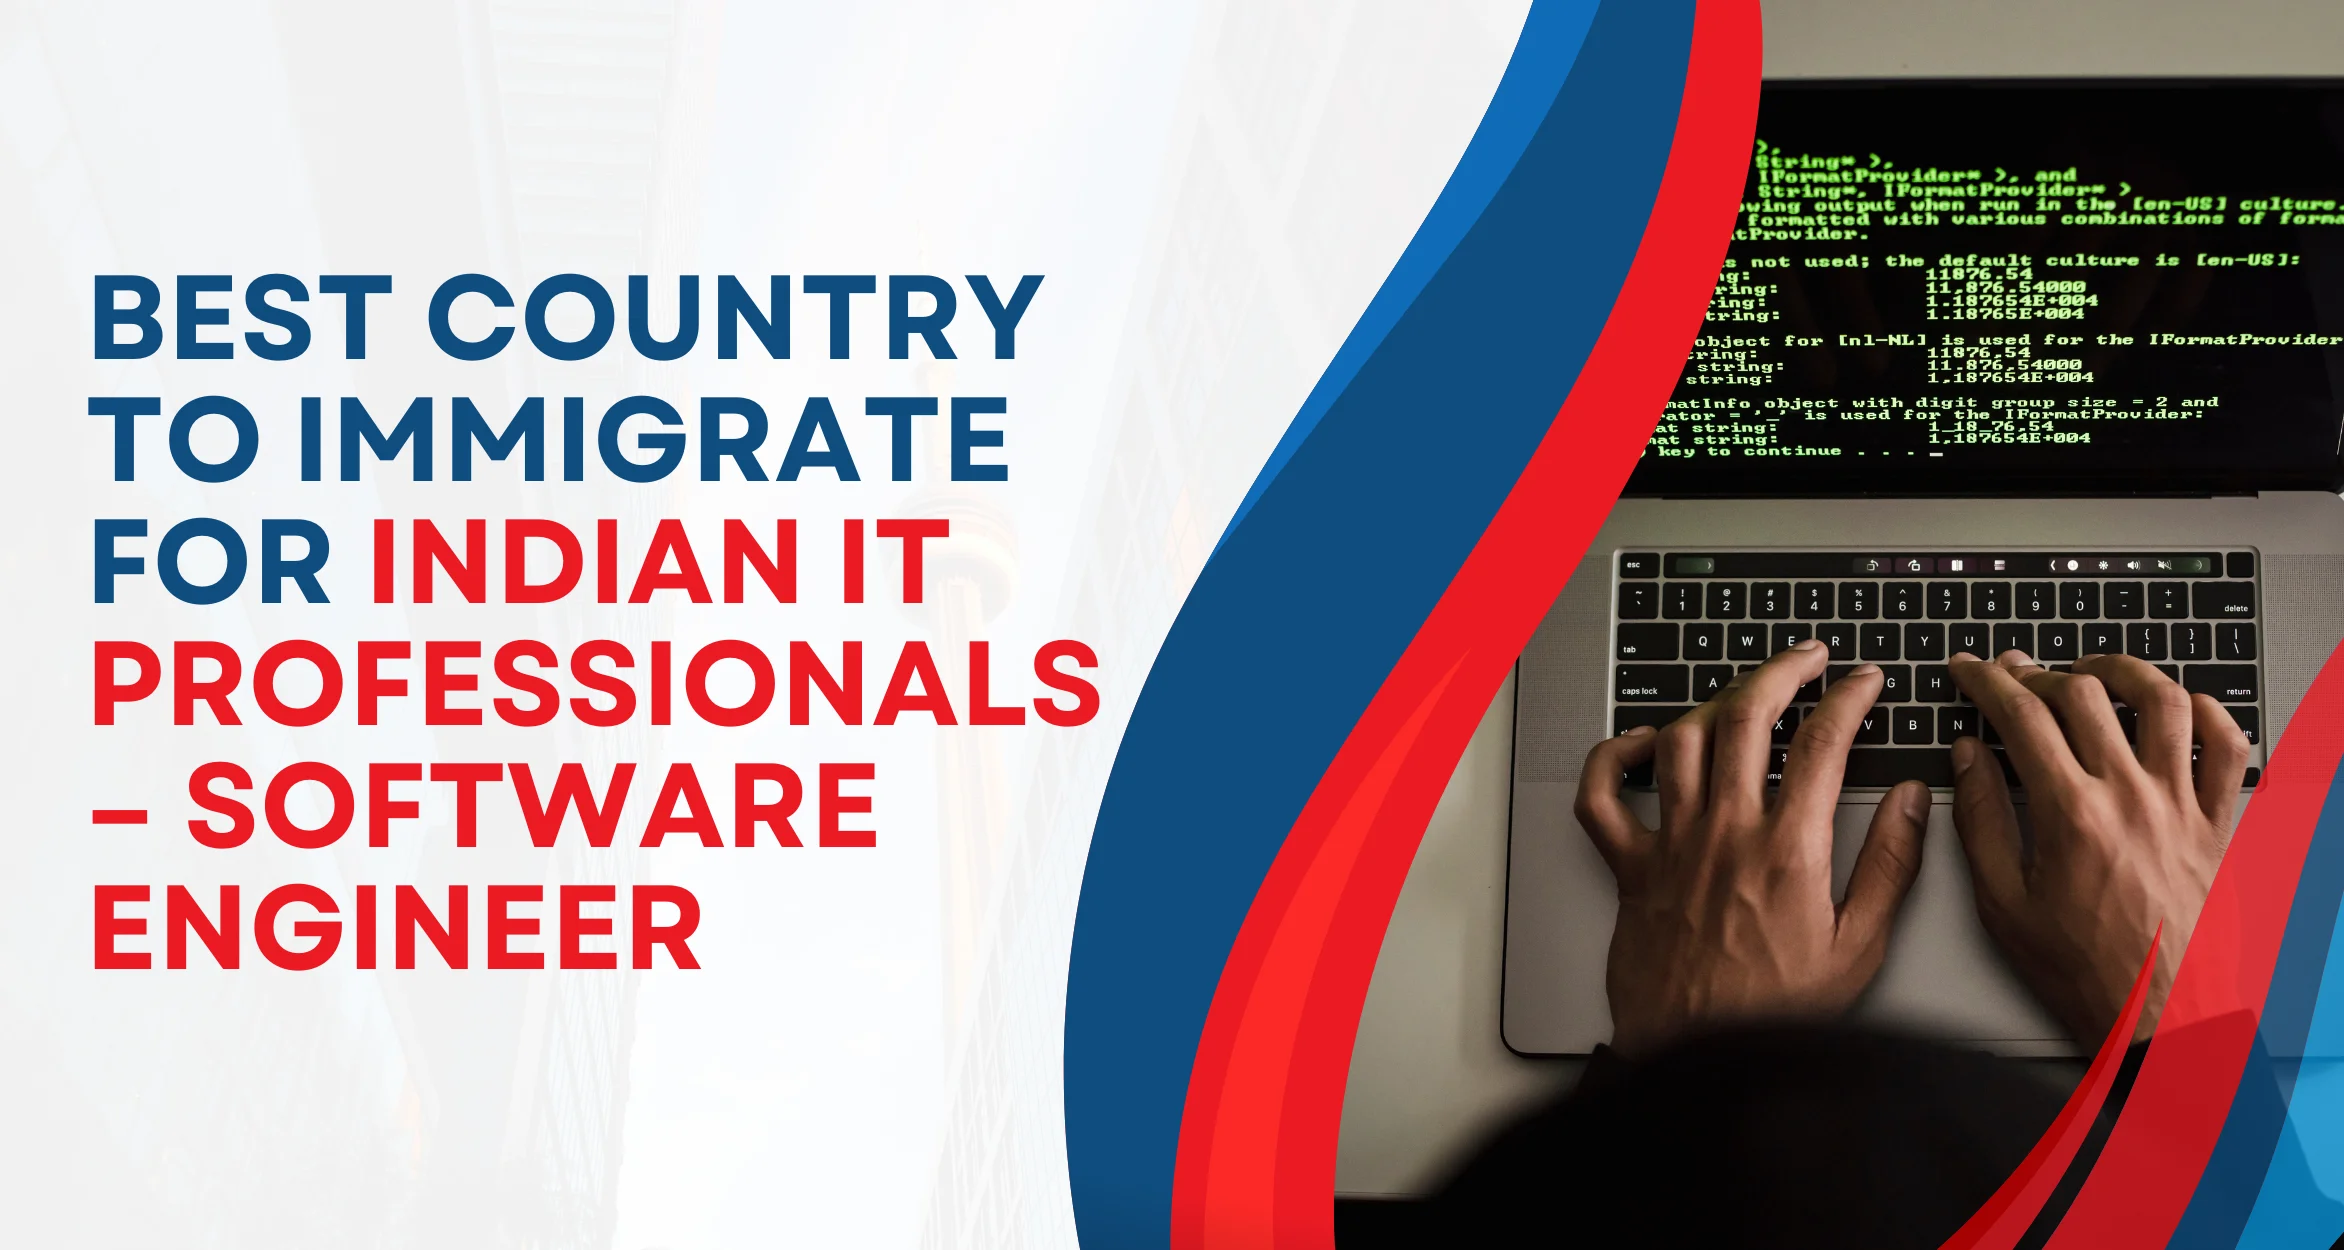 Best country to immigrate for Indian IT professionals – Software Engineer